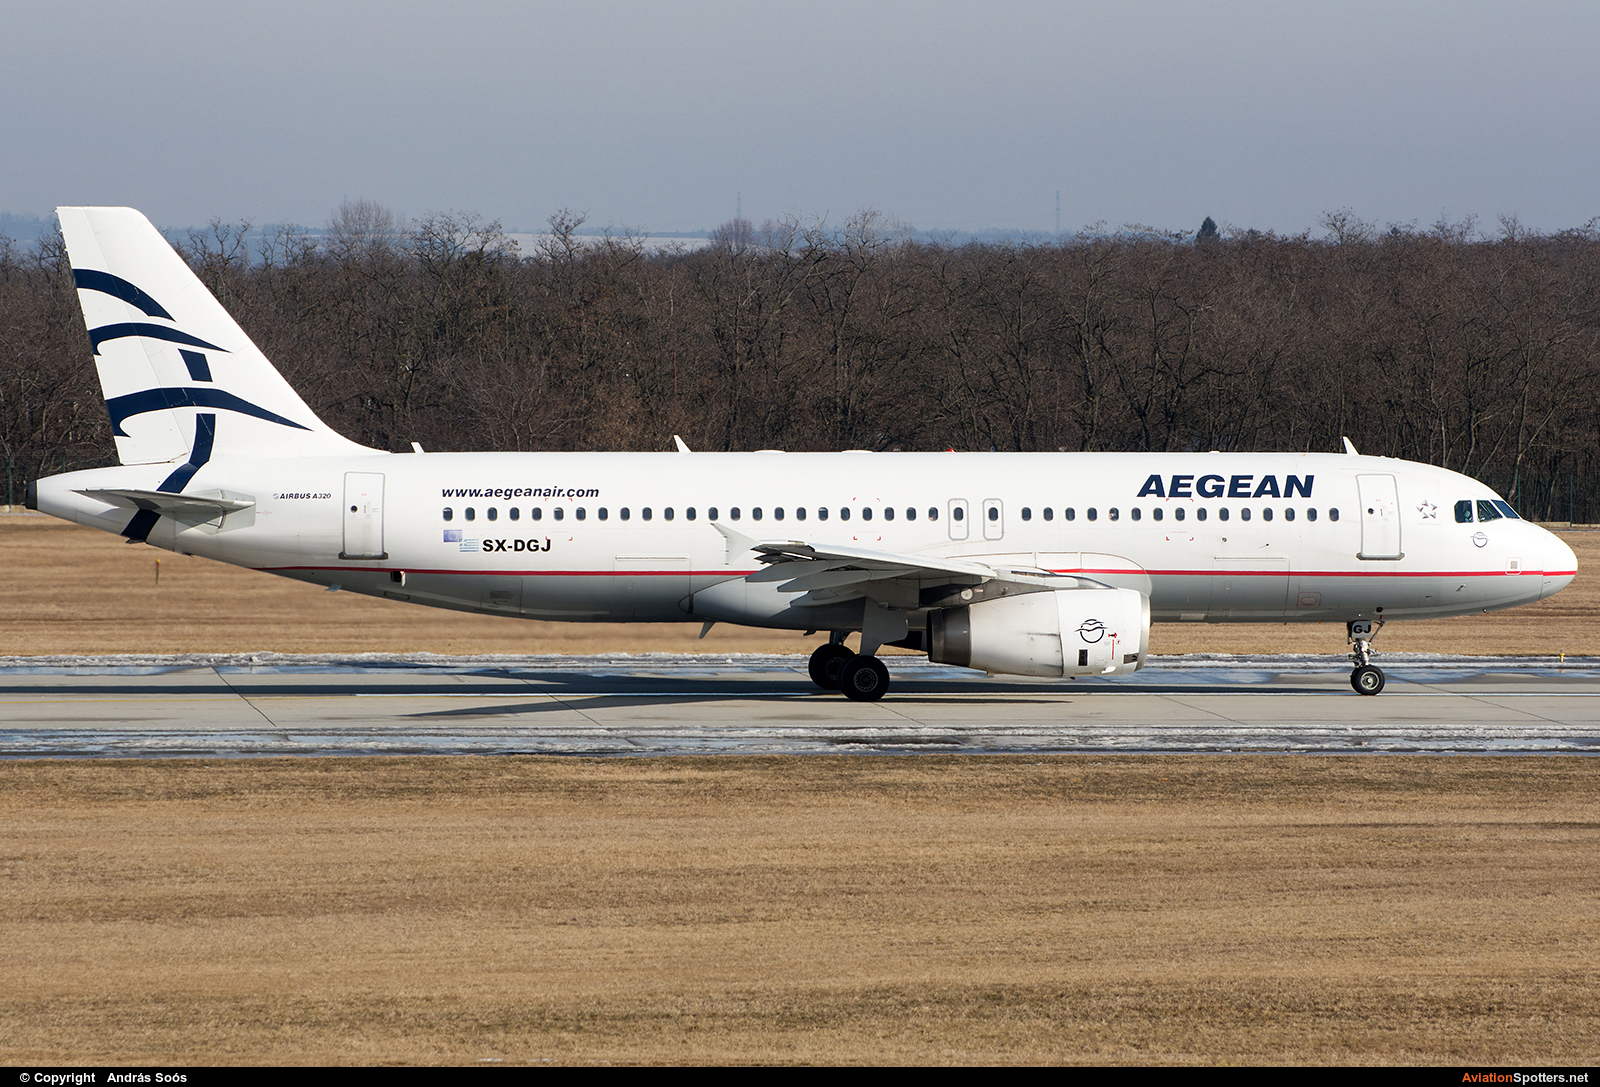 Aegean Airlines  -  A320  (SX-DGJ) By András Soós (sas1965)